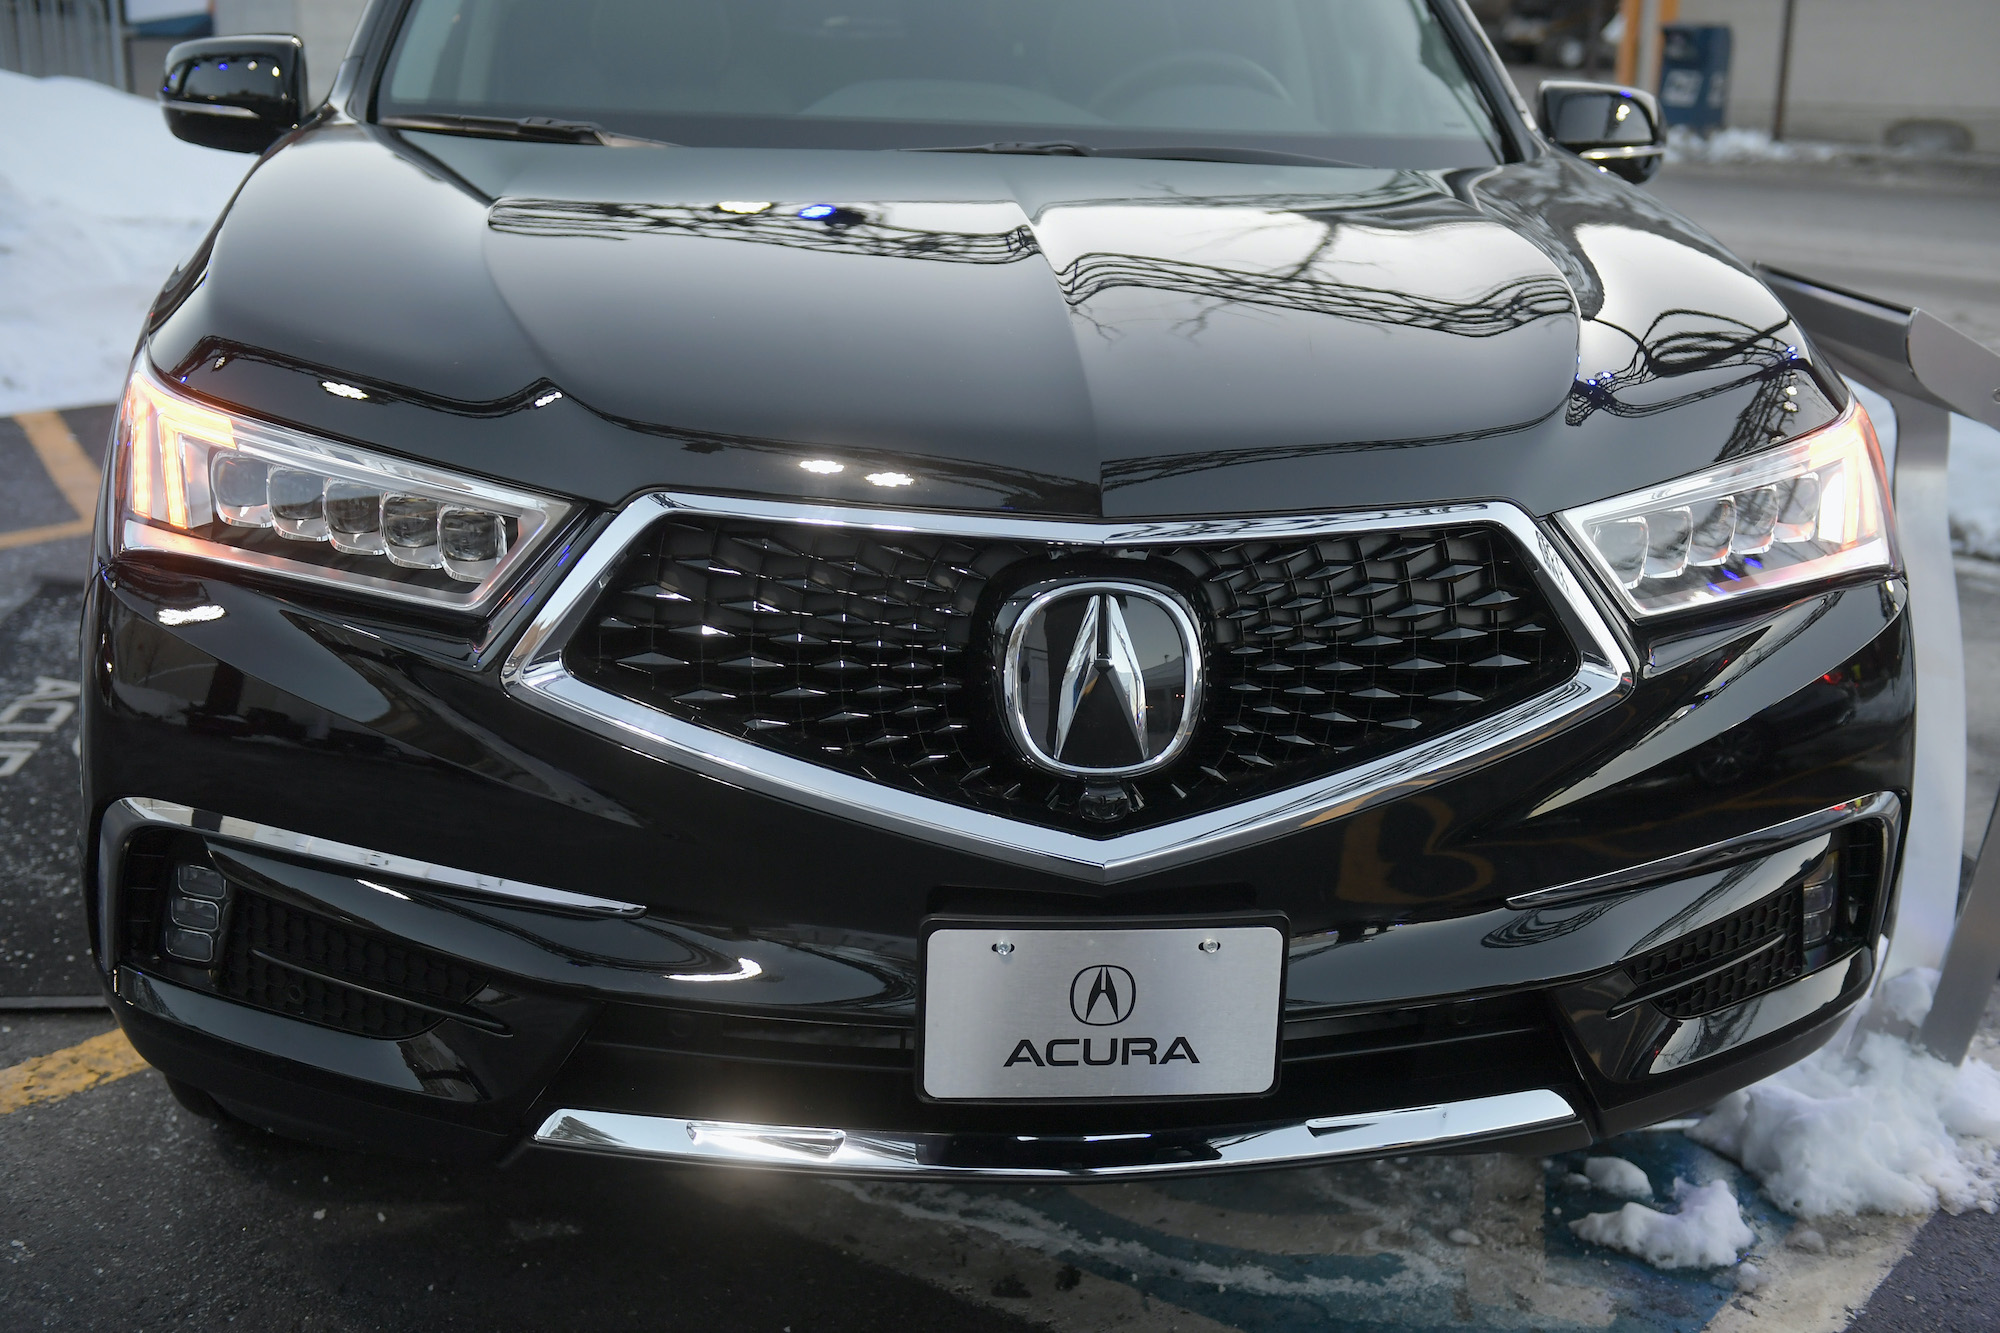 Acura MDX is seen during the 2018 Sundance Film Festival